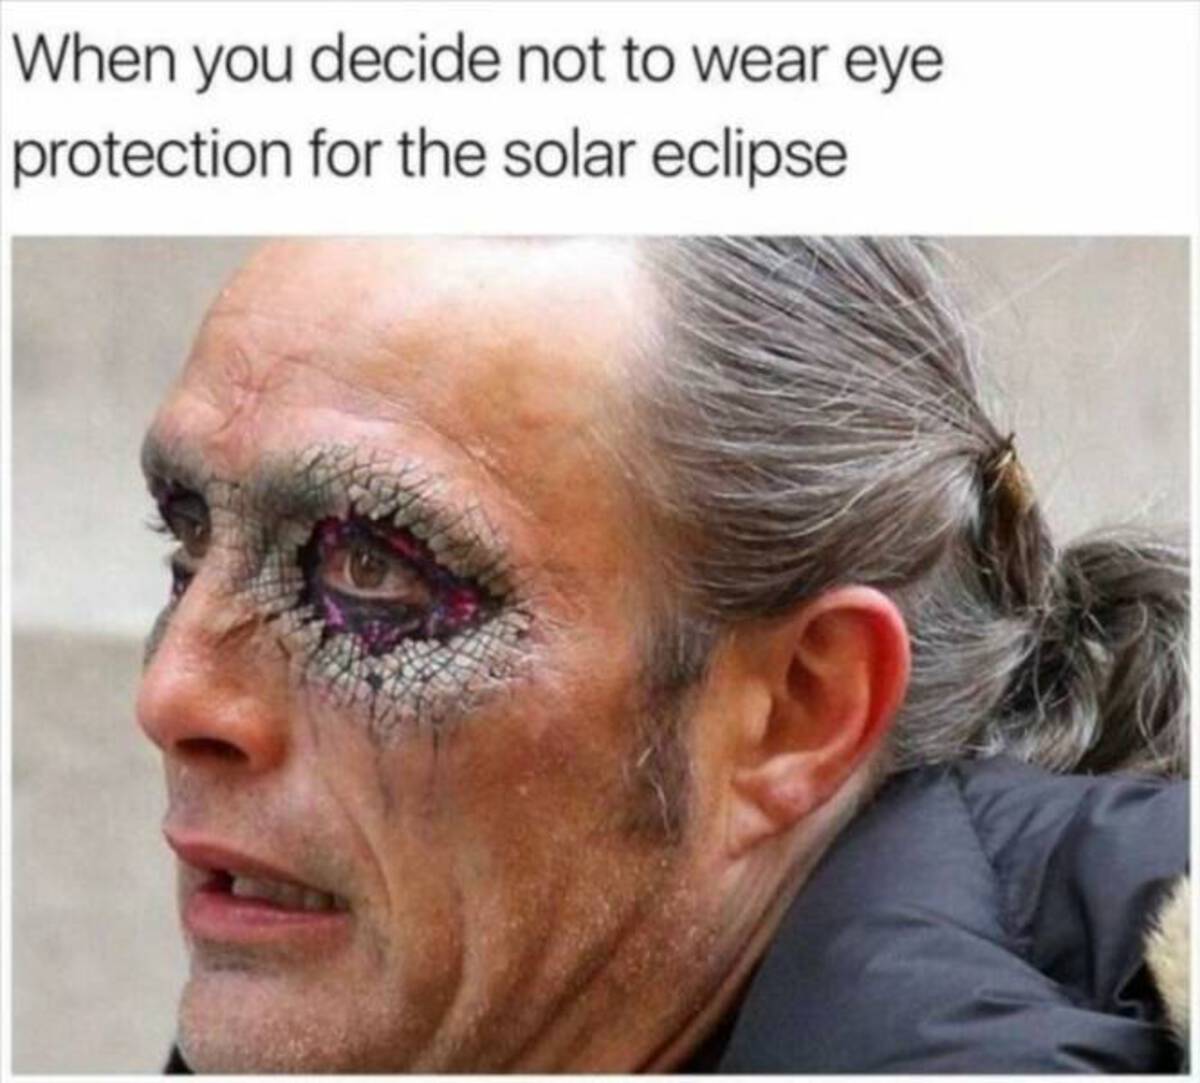 Solar eclipse - When you decide not to wear eye protection for the solar eclipse